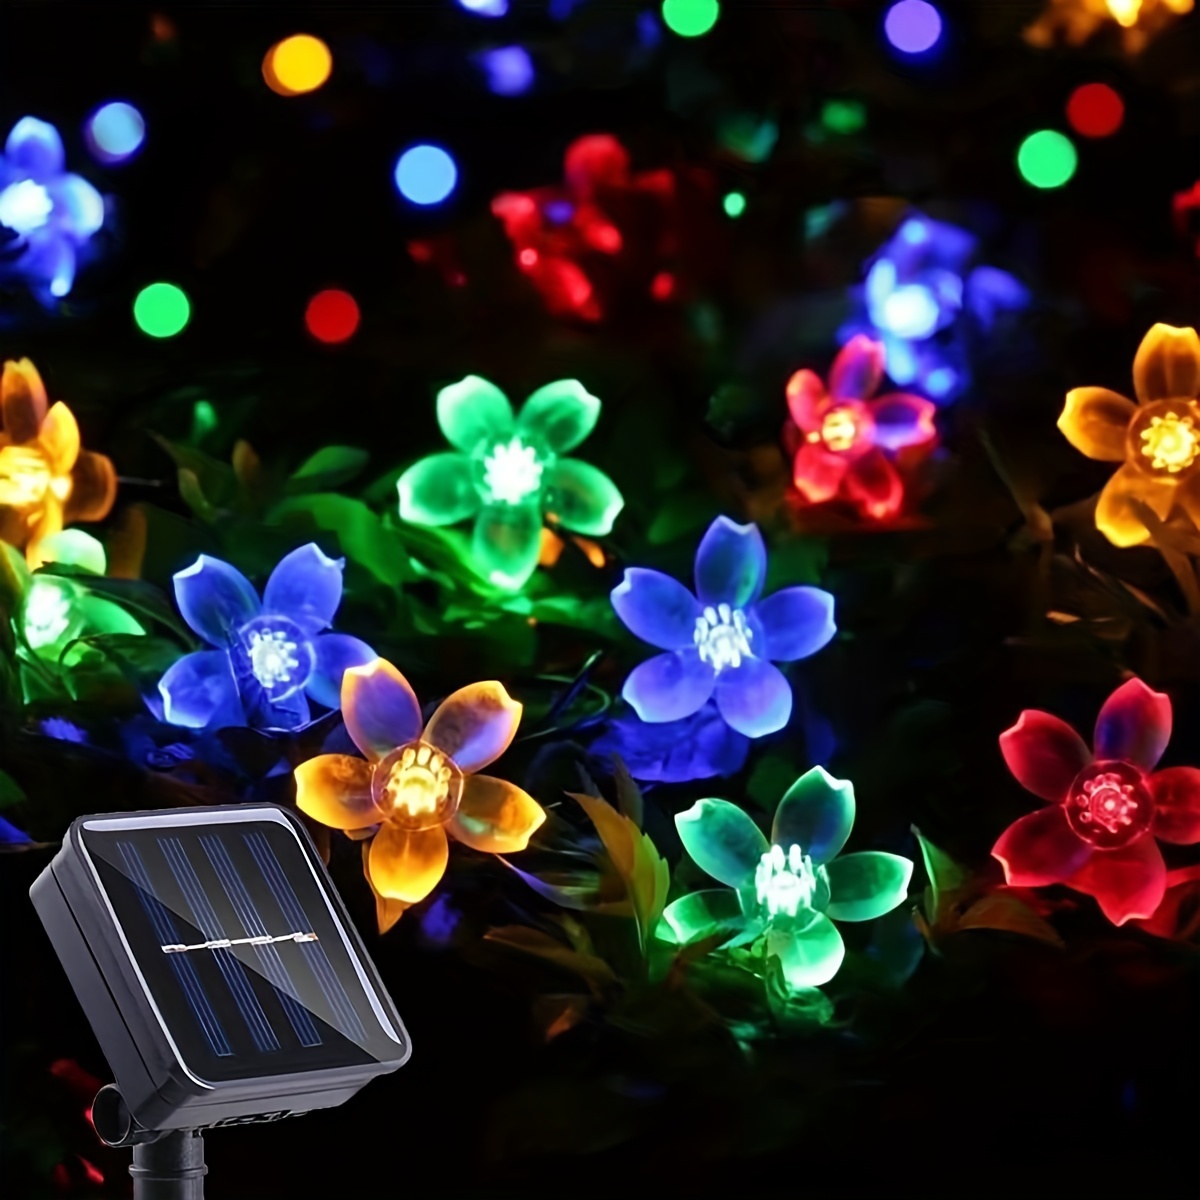 

1pc Solar String Flower Lights Outdoor Waterproof 5m/16.4ft 20 Led Fairy Light Decorations For Garden Fence Patio Yard Christmas Tree, Lawn, Patio, Party Decoration